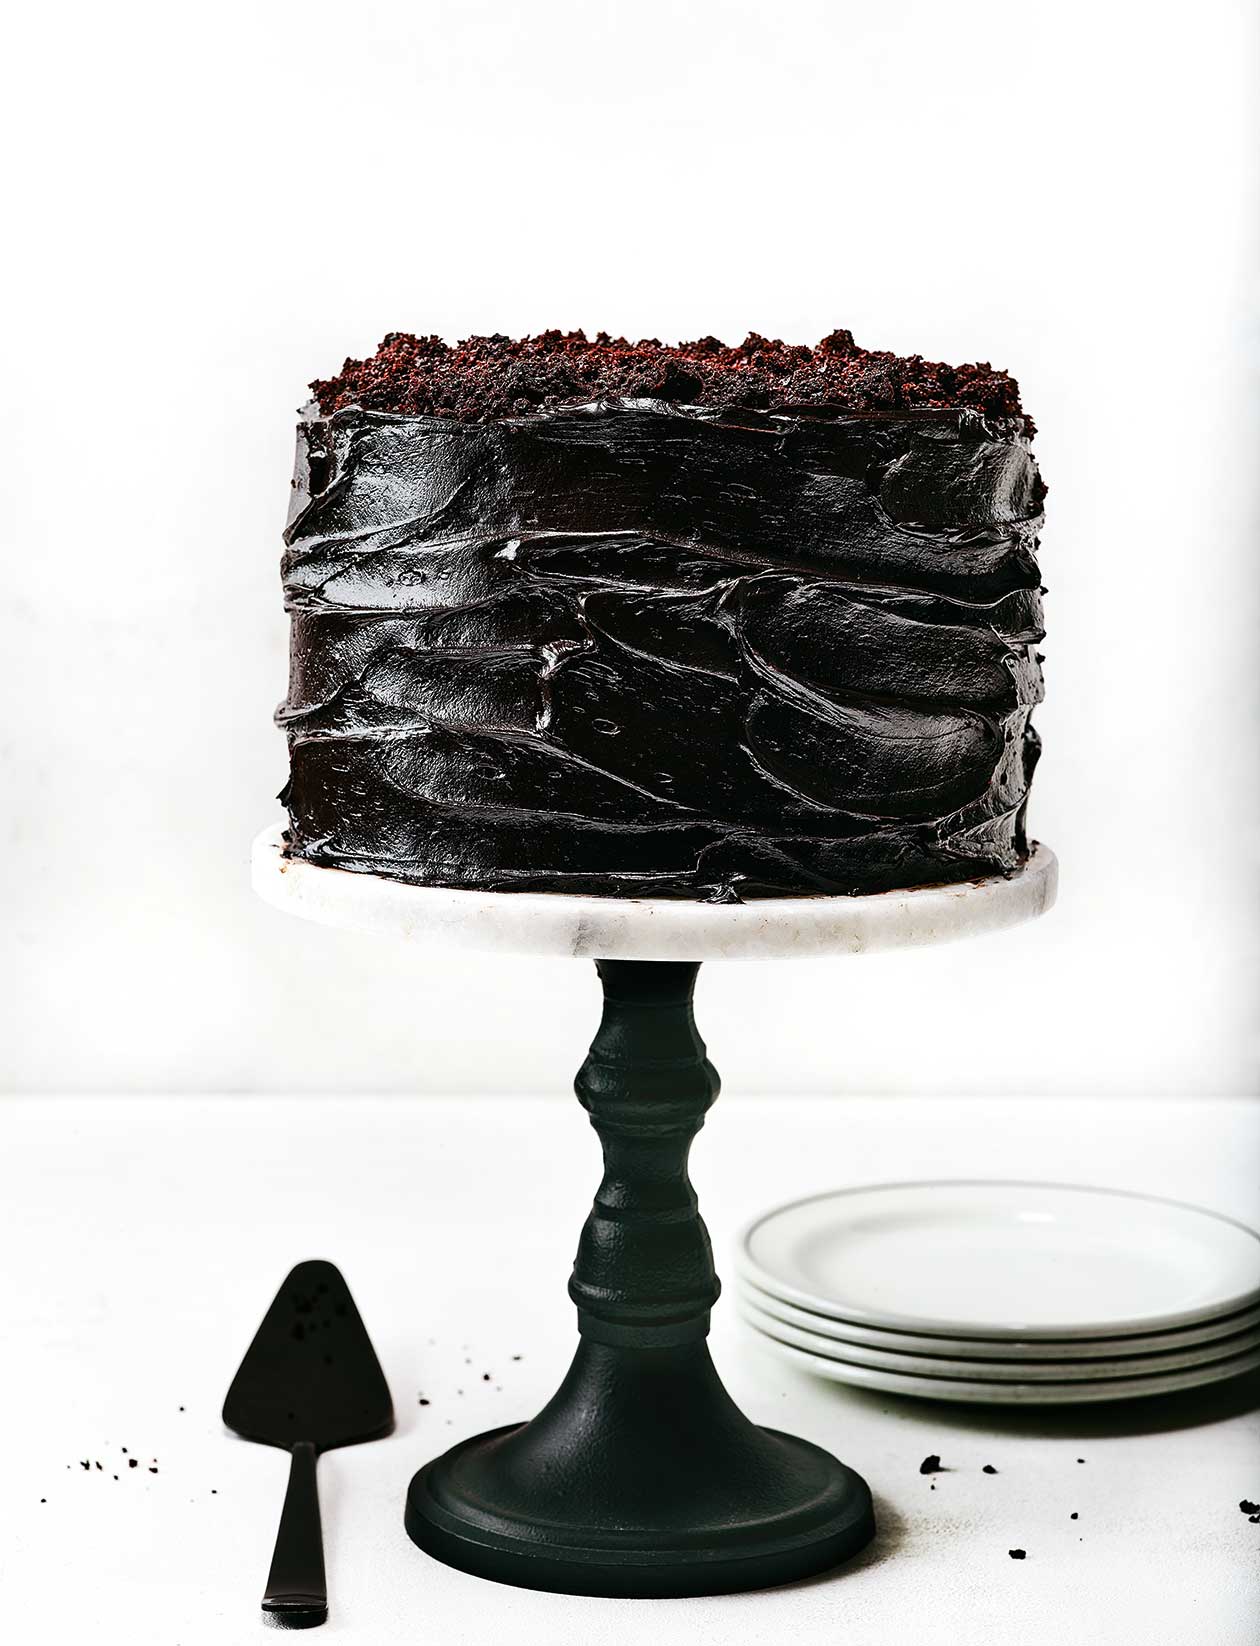 Moist Black Velvet Cake from Scratch with Black Frosting (No Food Coloring)  - I Scream for Buttercream